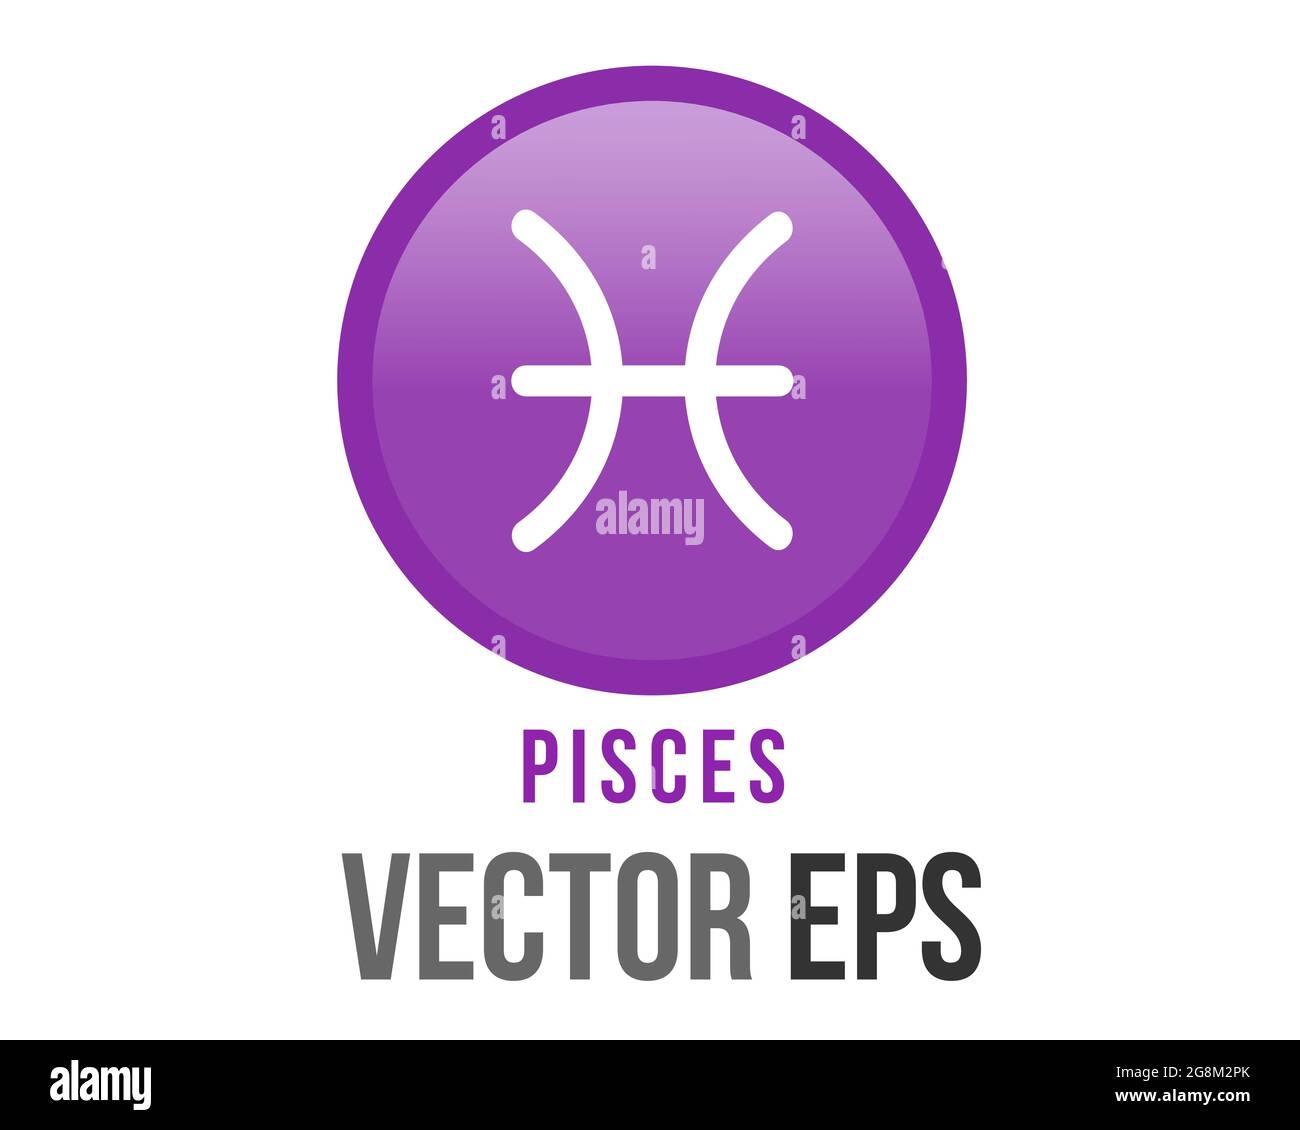 The isolated vector gradient purple Pisces astrological sign icon in the Zodiac,  represents fish Stock Vector